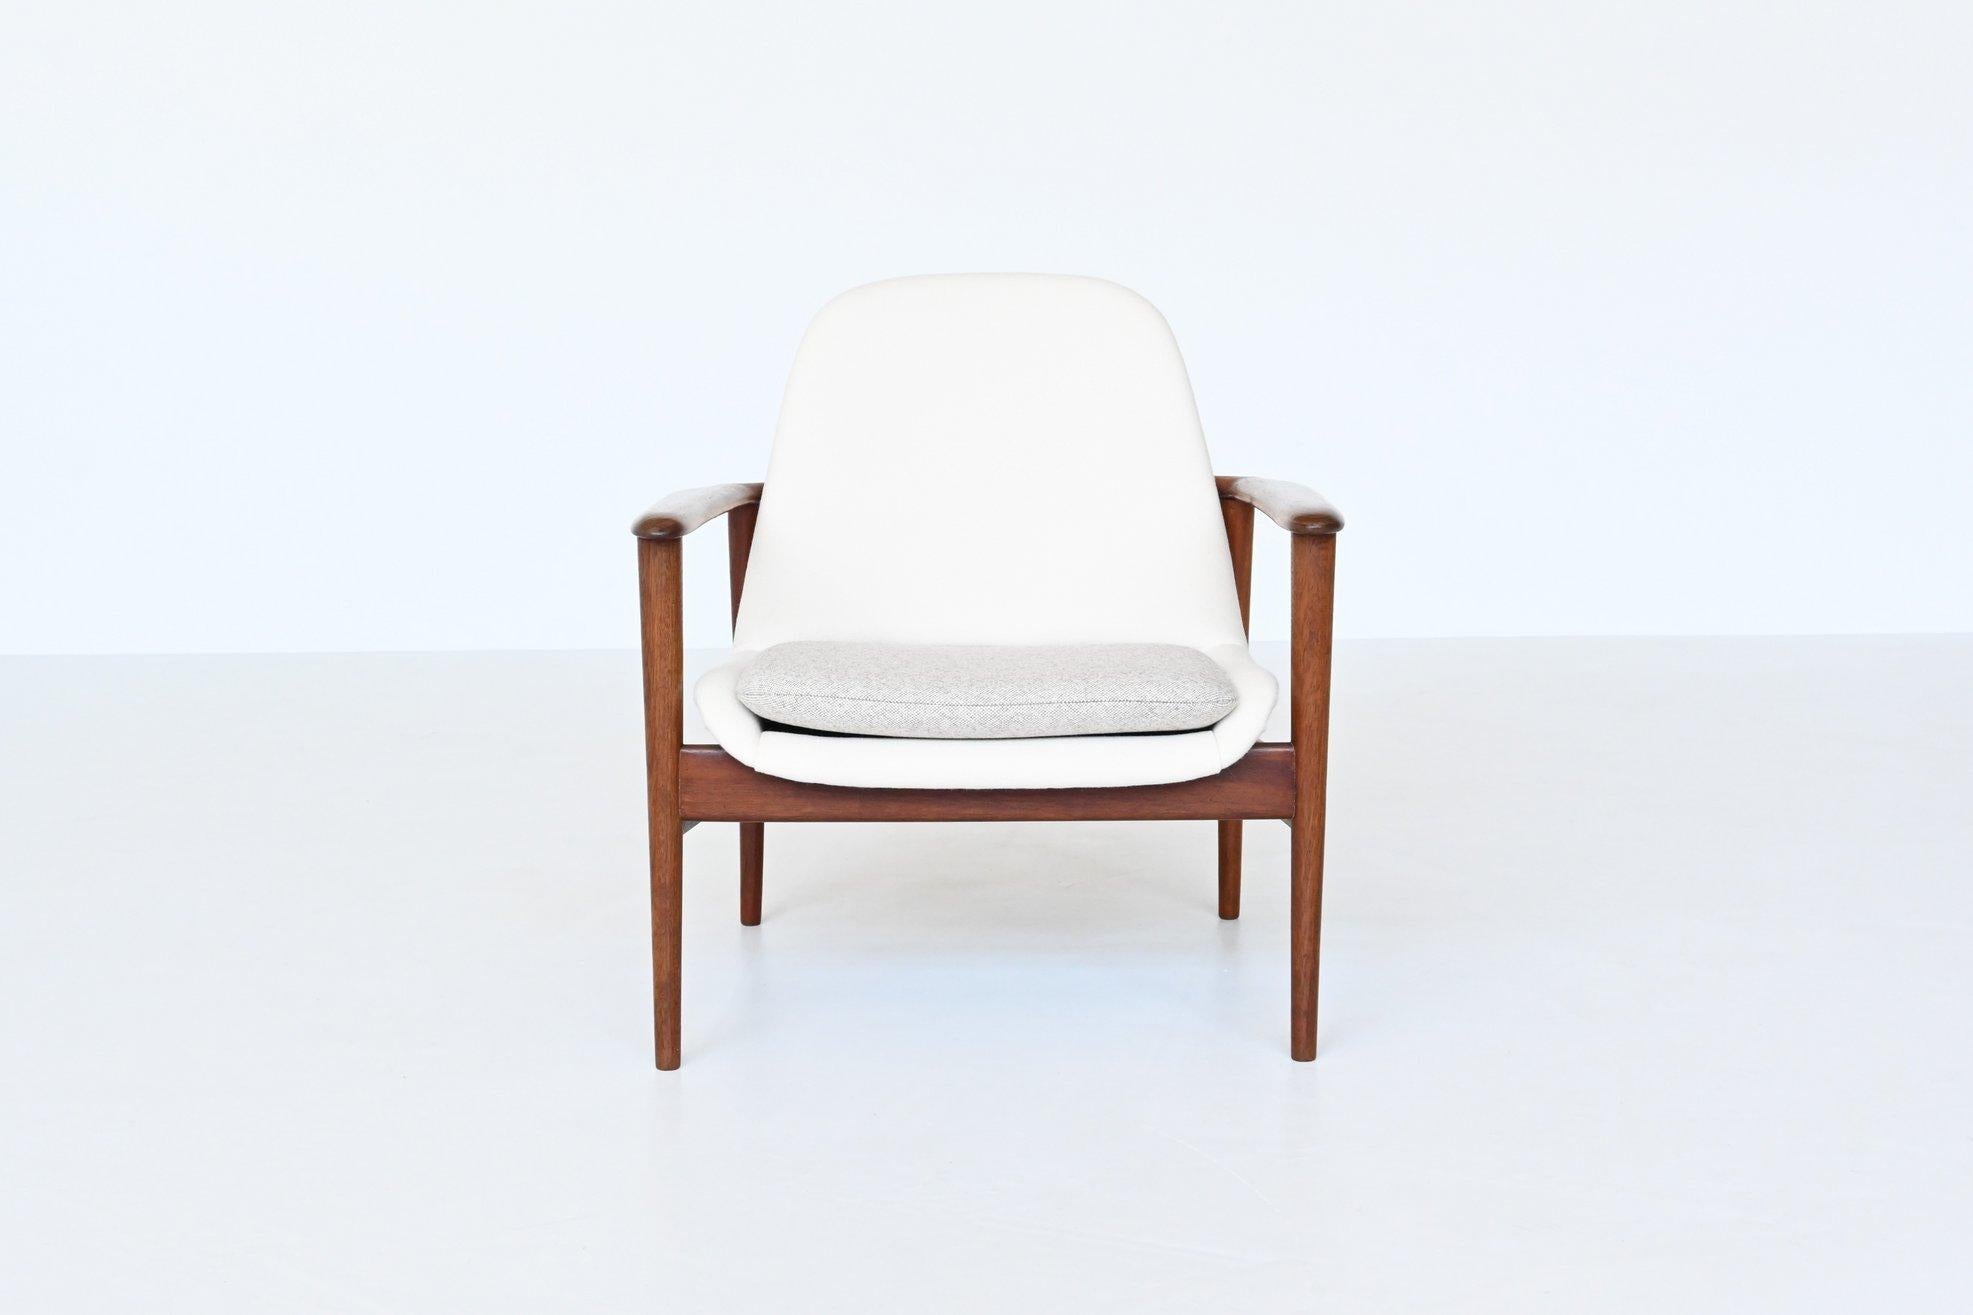 Beautiful shaped Scandinavian lounge chair in the style of IB Kofod Larsen and Arne Hovmand-Olsen, Denmark 1960. This chair has a solid teak wooden frame and it is newly upholstered with white and grey wool upholstery. The teak wooden frame flows